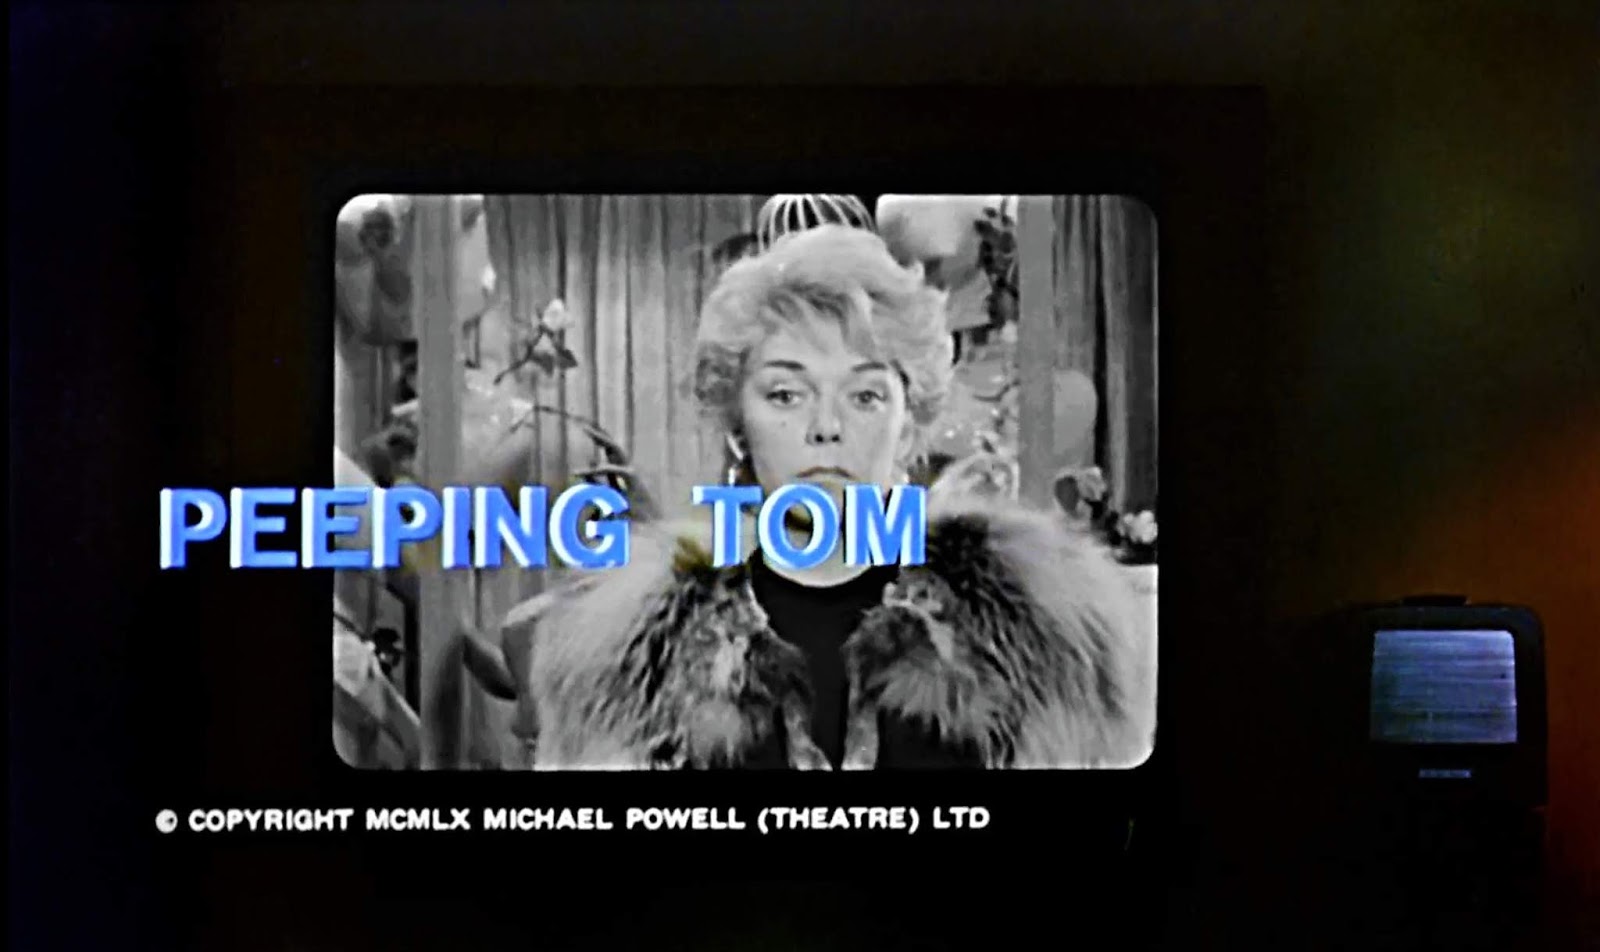 DREAMS ARE WHAT LE CINEMA IS FOR... PEEPING TOM 1960